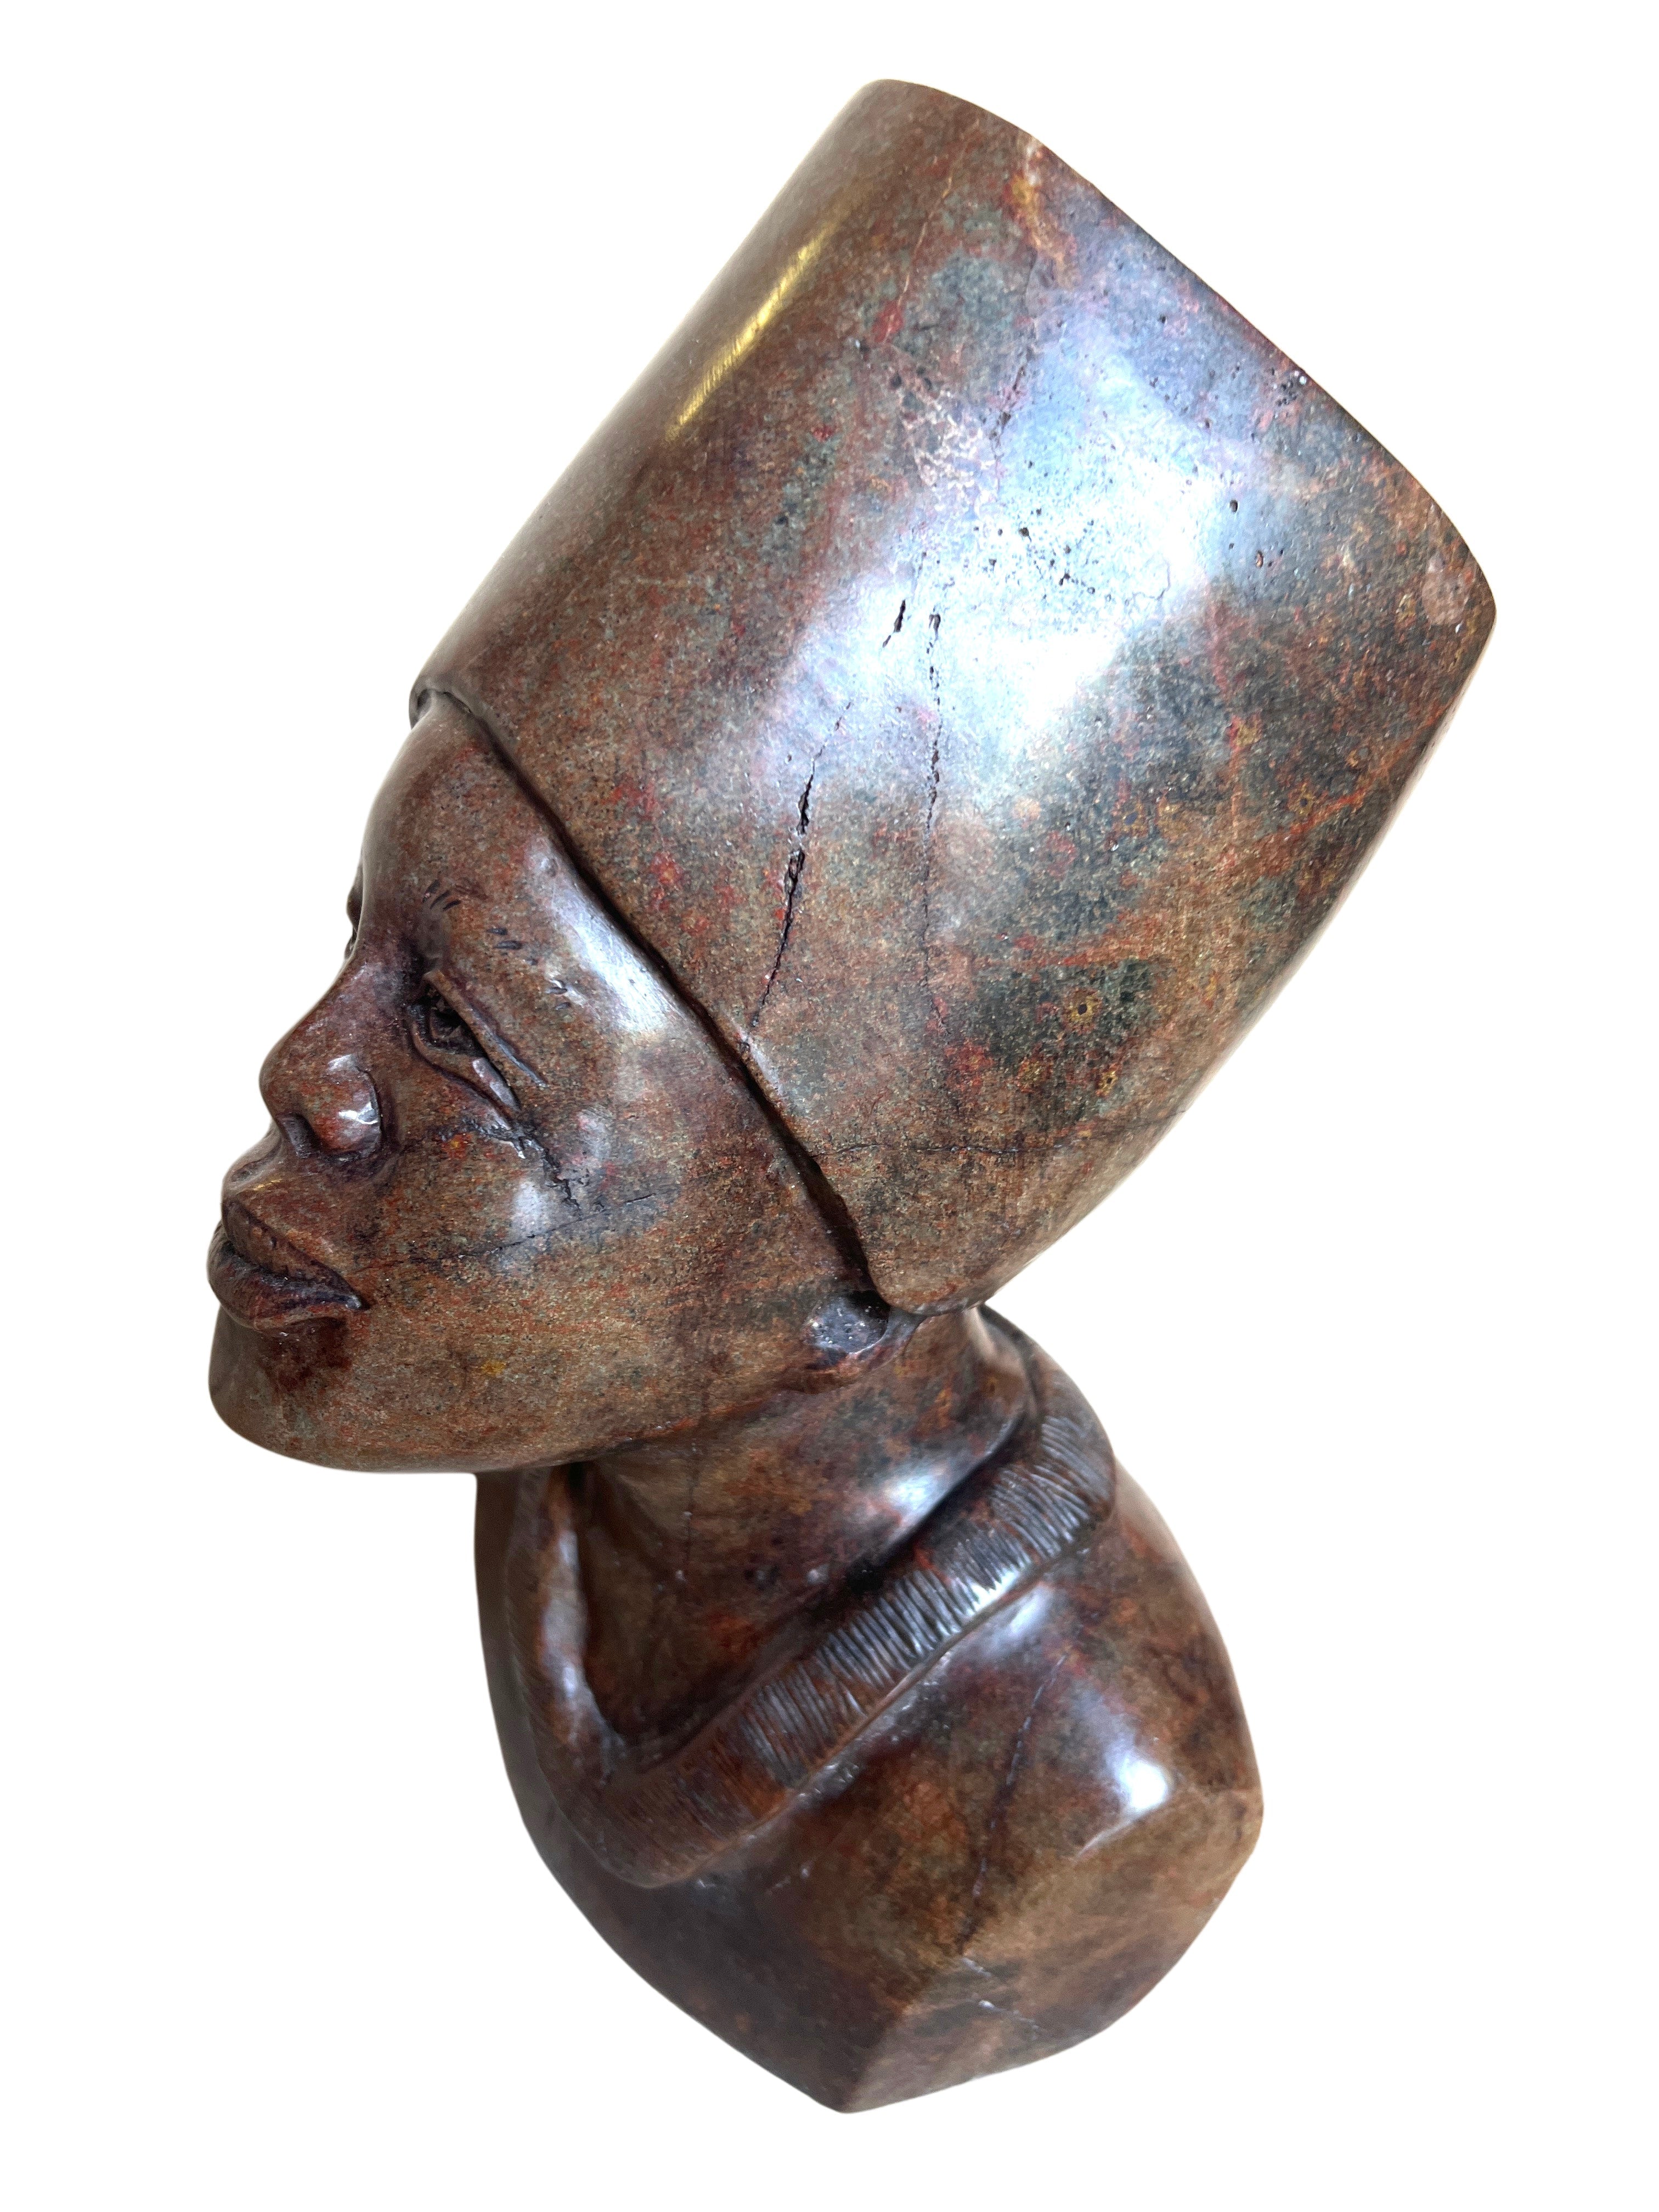 Shona Tribe Fruit Serpentine Woman With hat